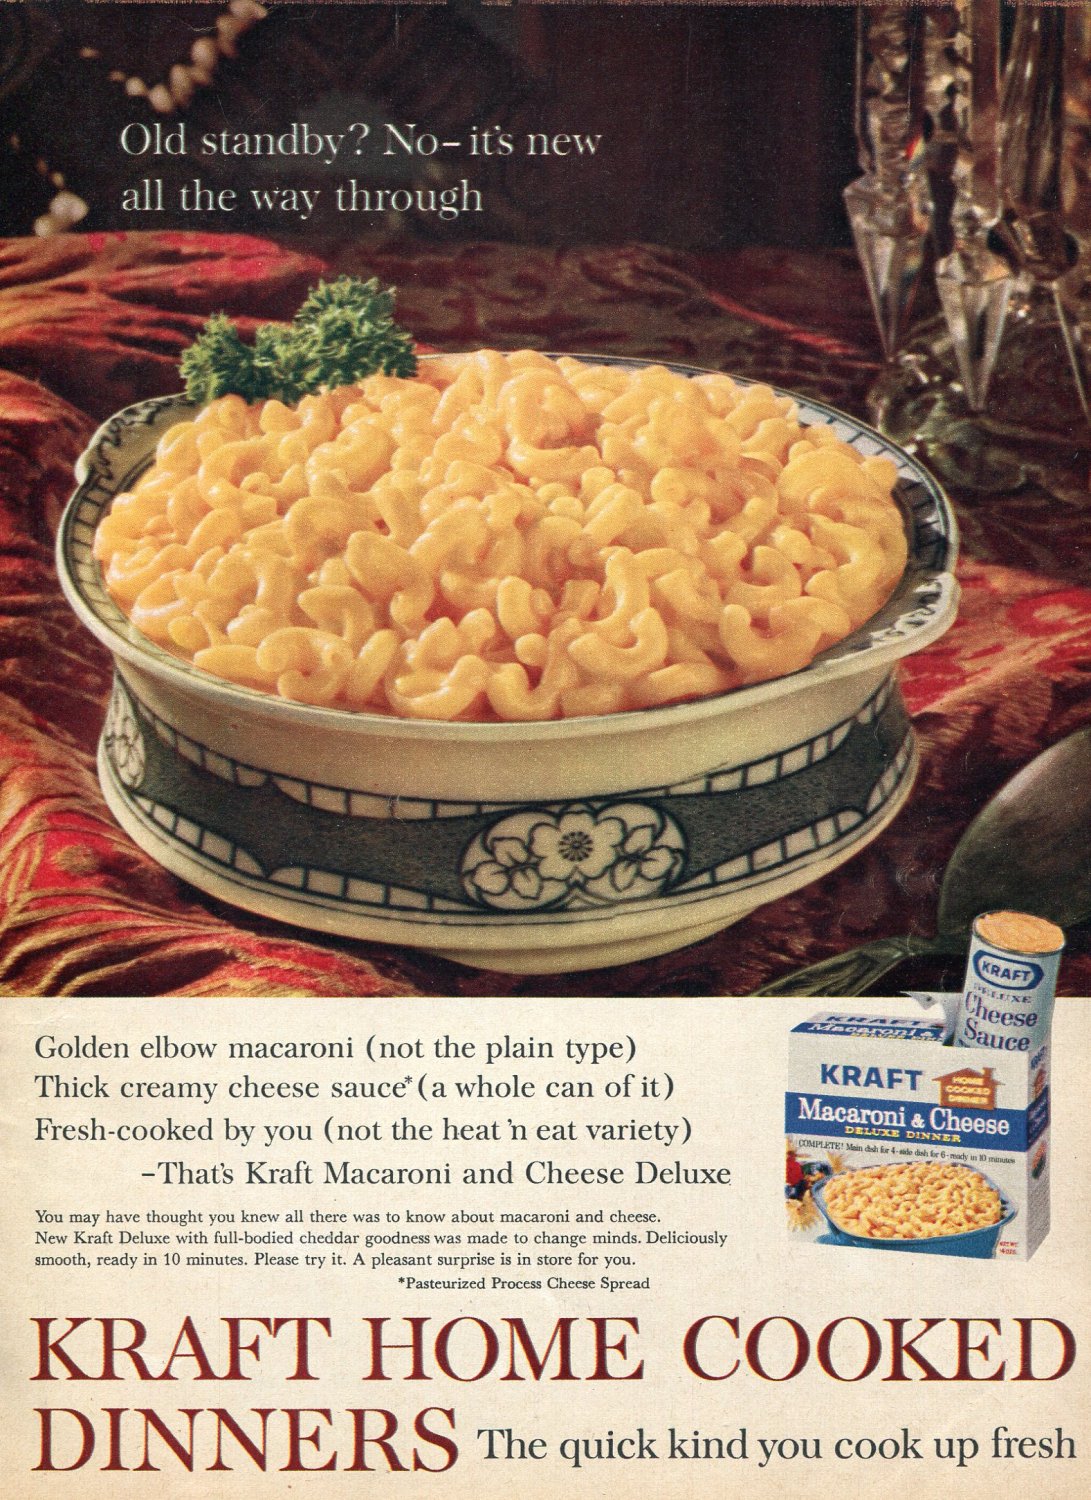 1964 Kraft Macaroni and Cheese Deluxe Home Cooked Dinners 1960s Ad Advert